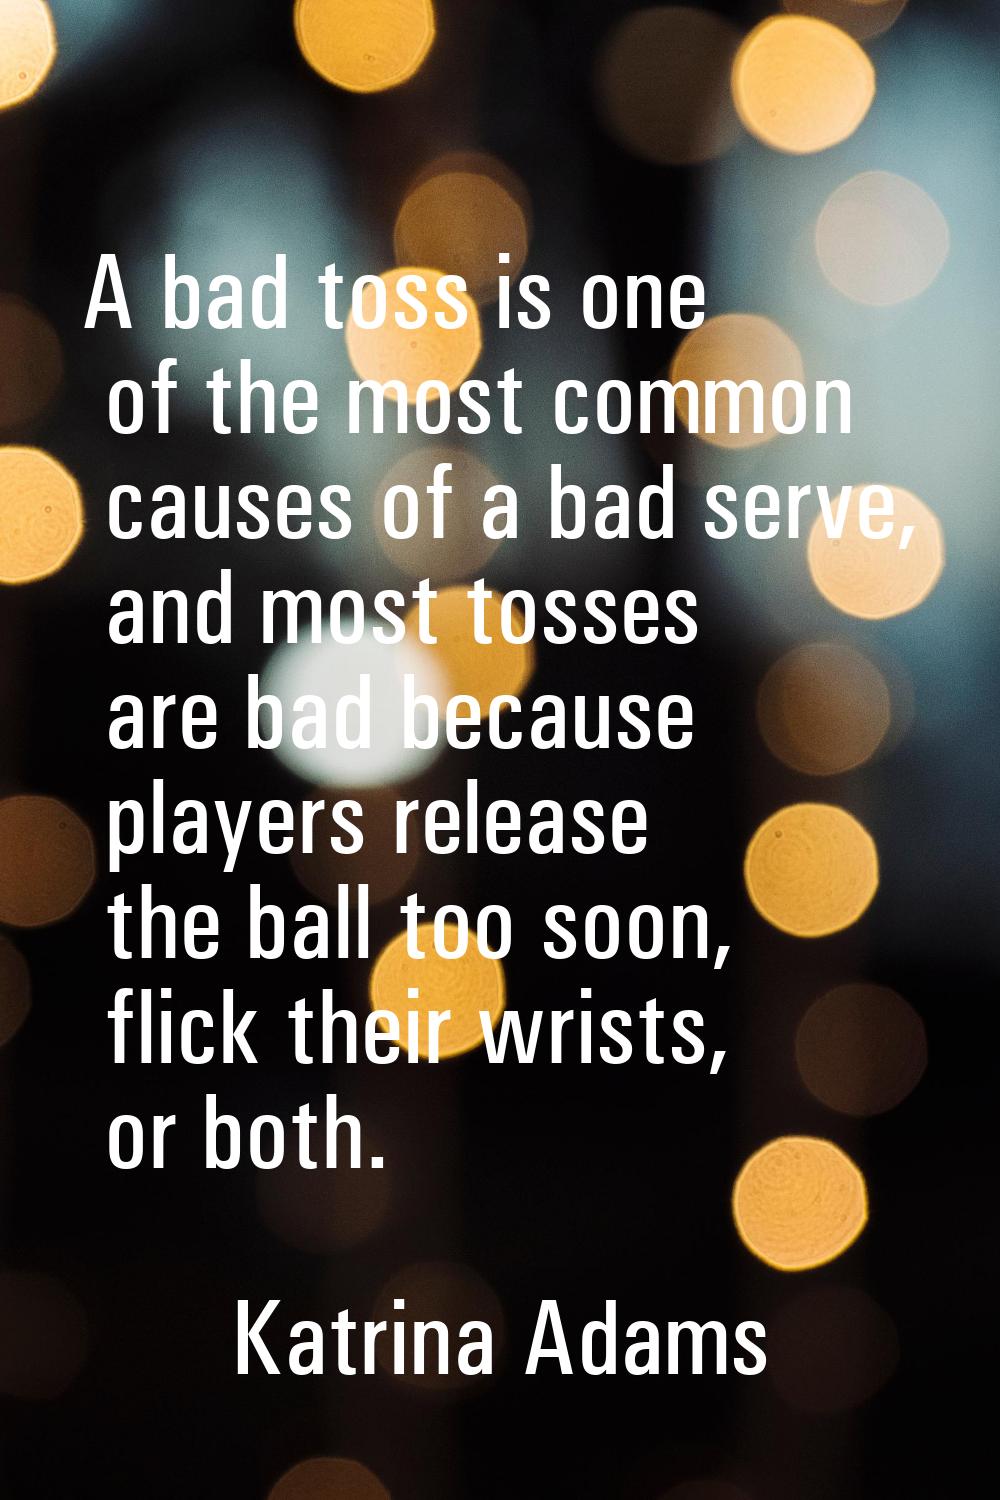 A bad toss is one of the most common causes of a bad serve, and most tosses are bad because players